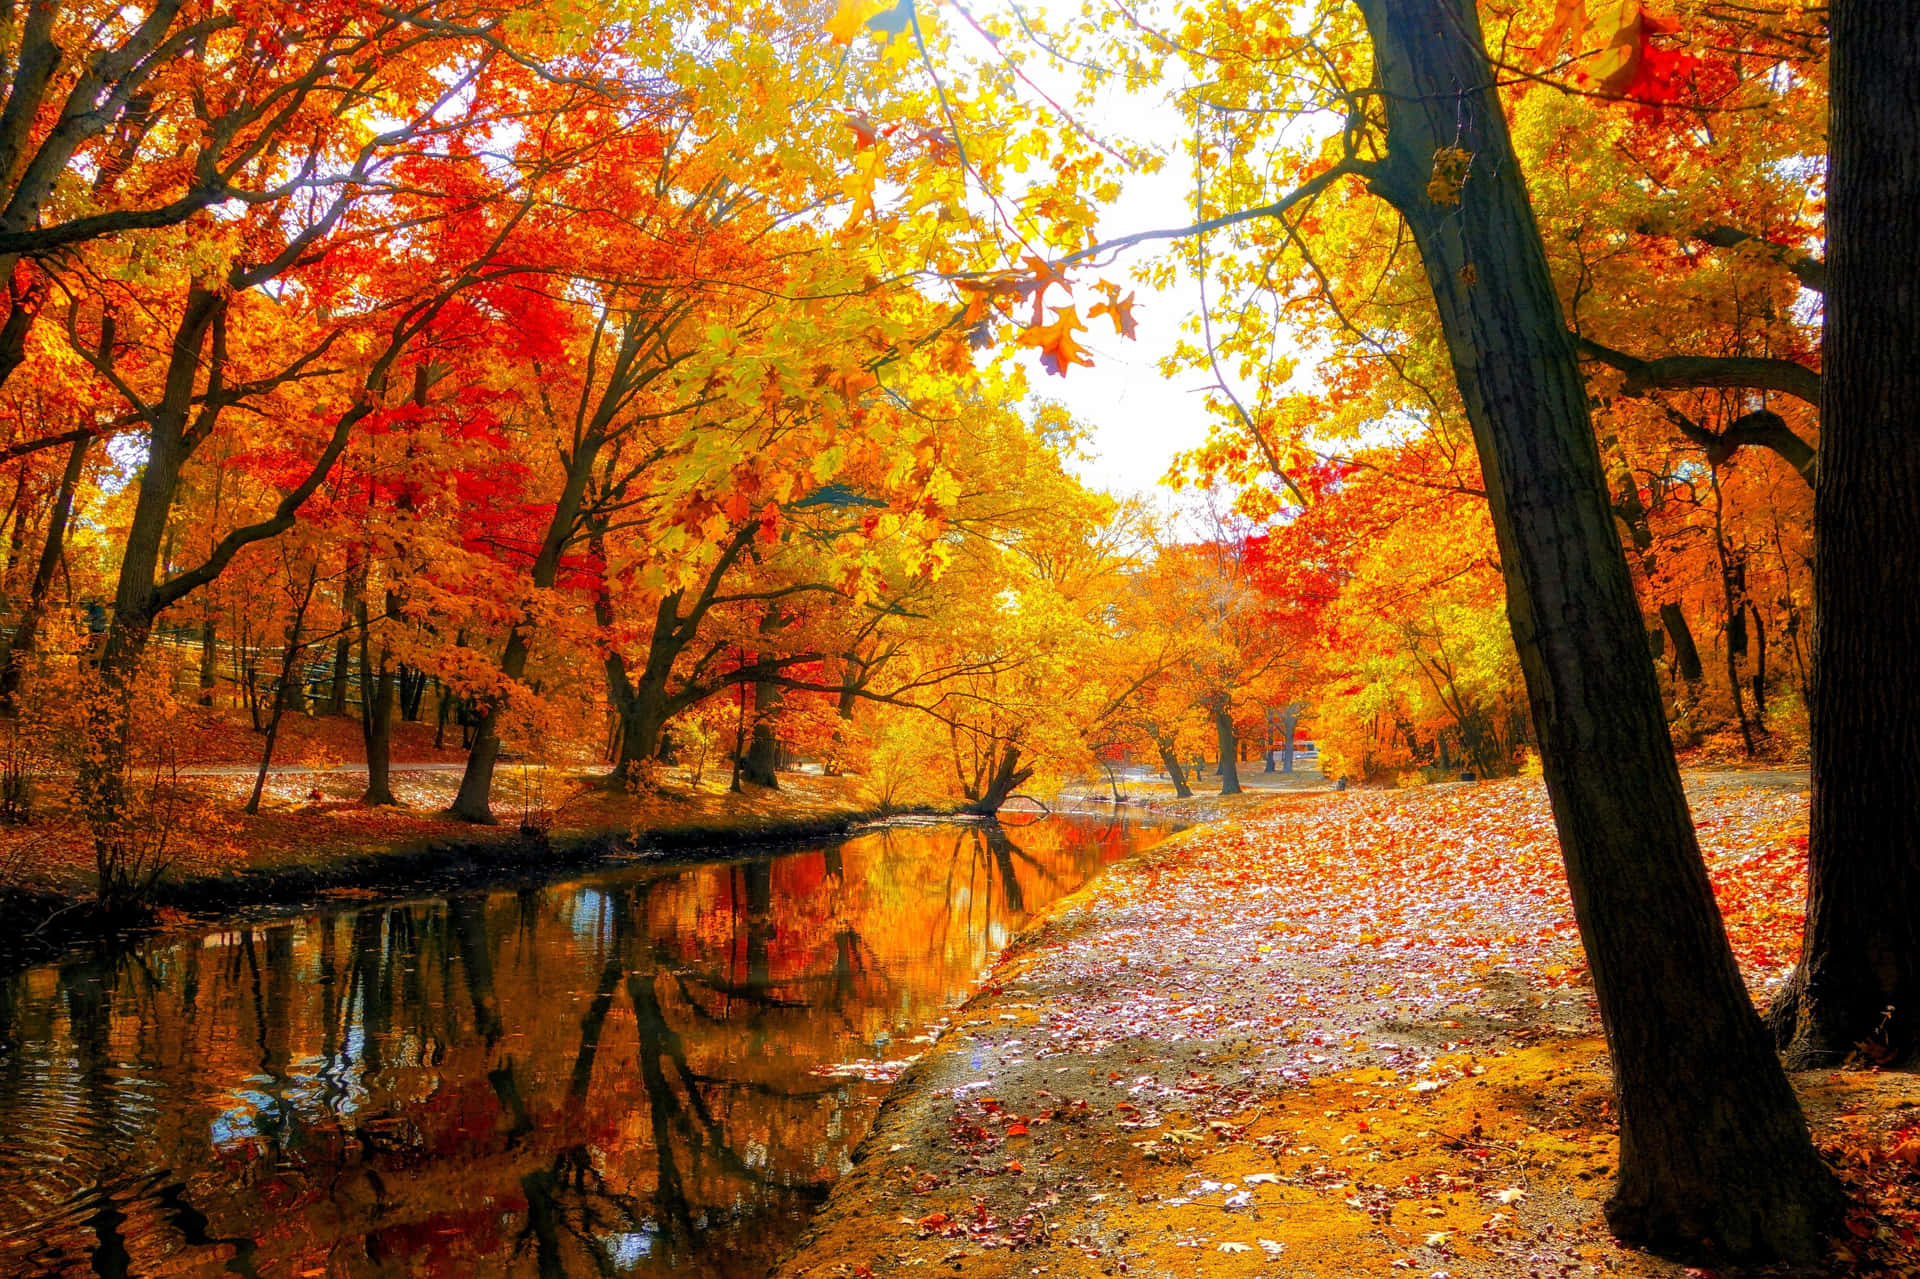 Bask in the Glory of Autumn - A Serene Fall Landscape